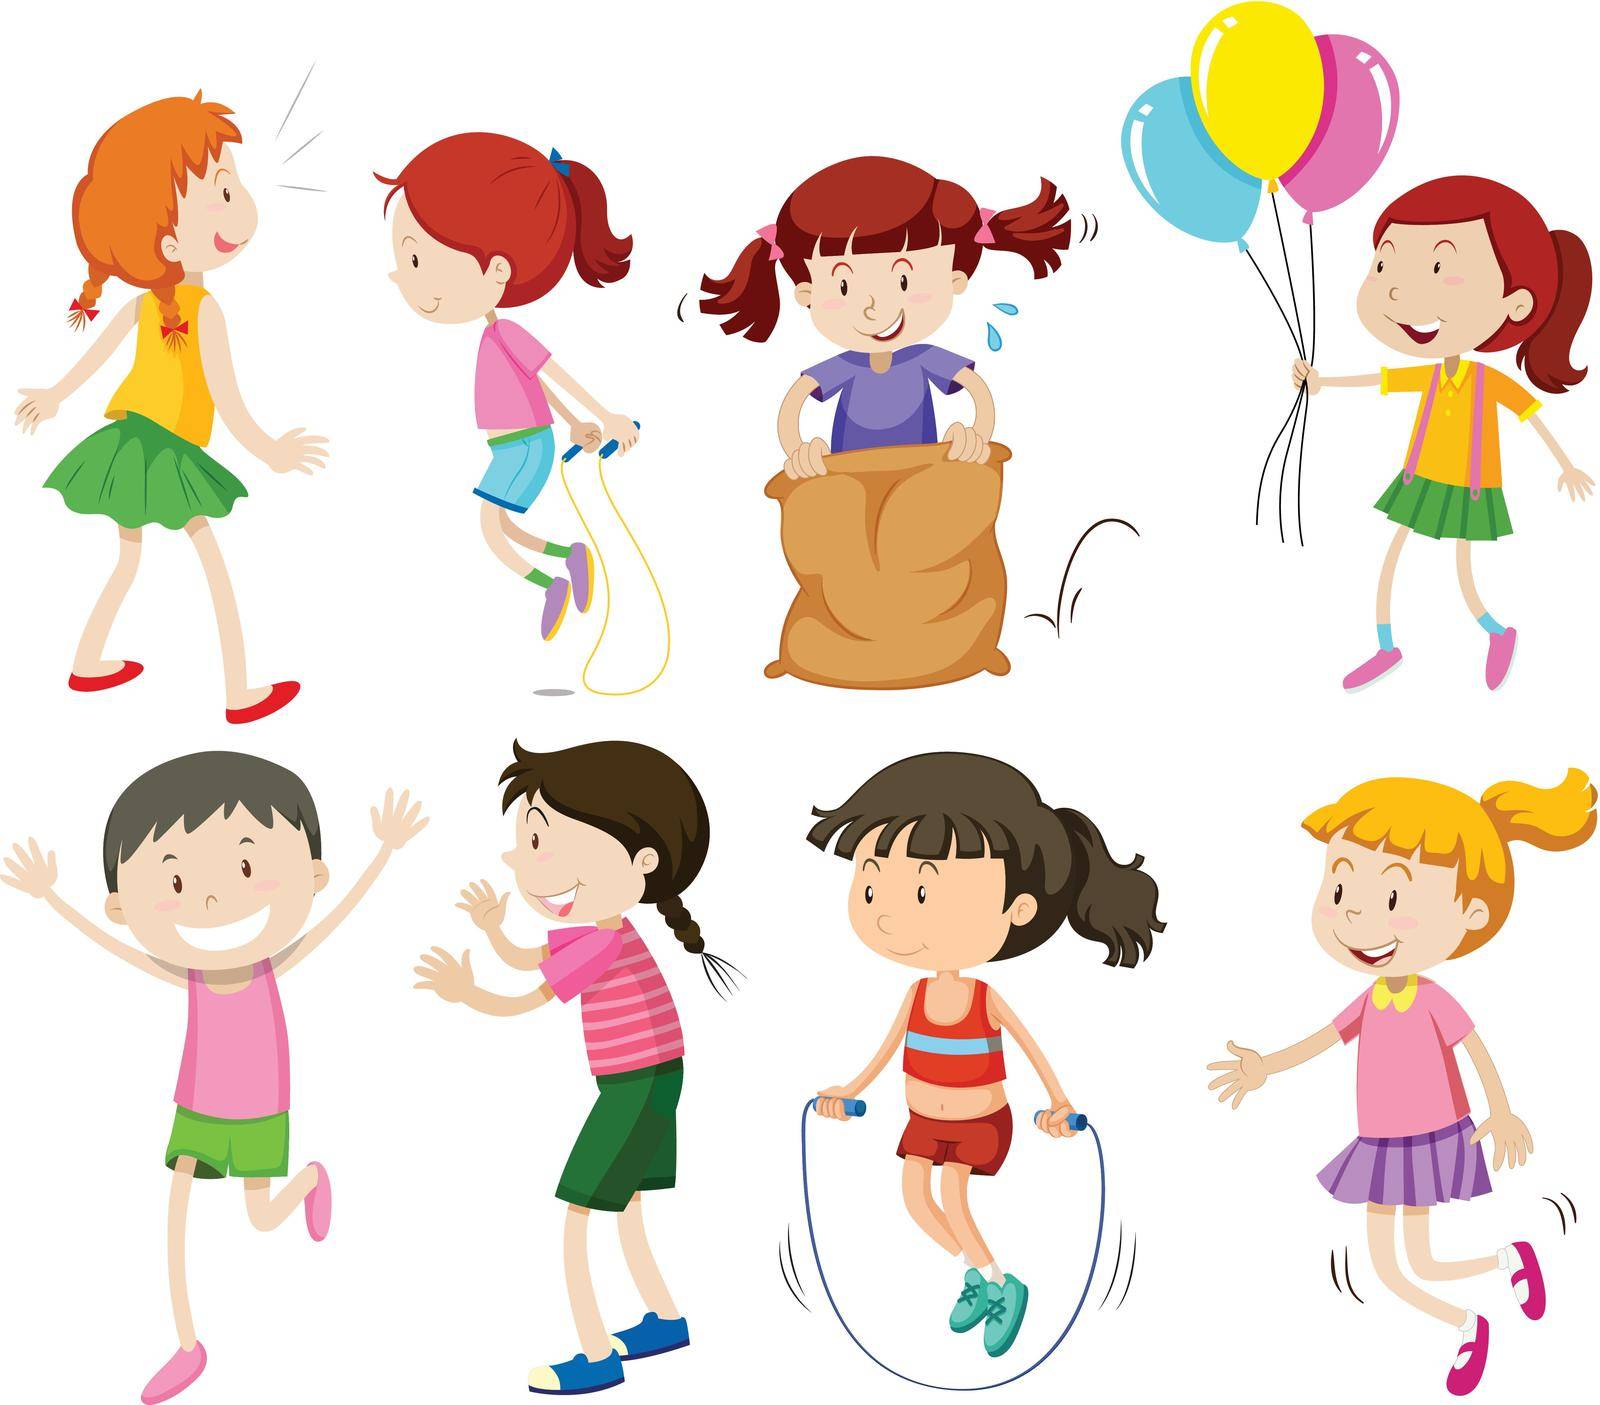 A set of girl and activity illustration